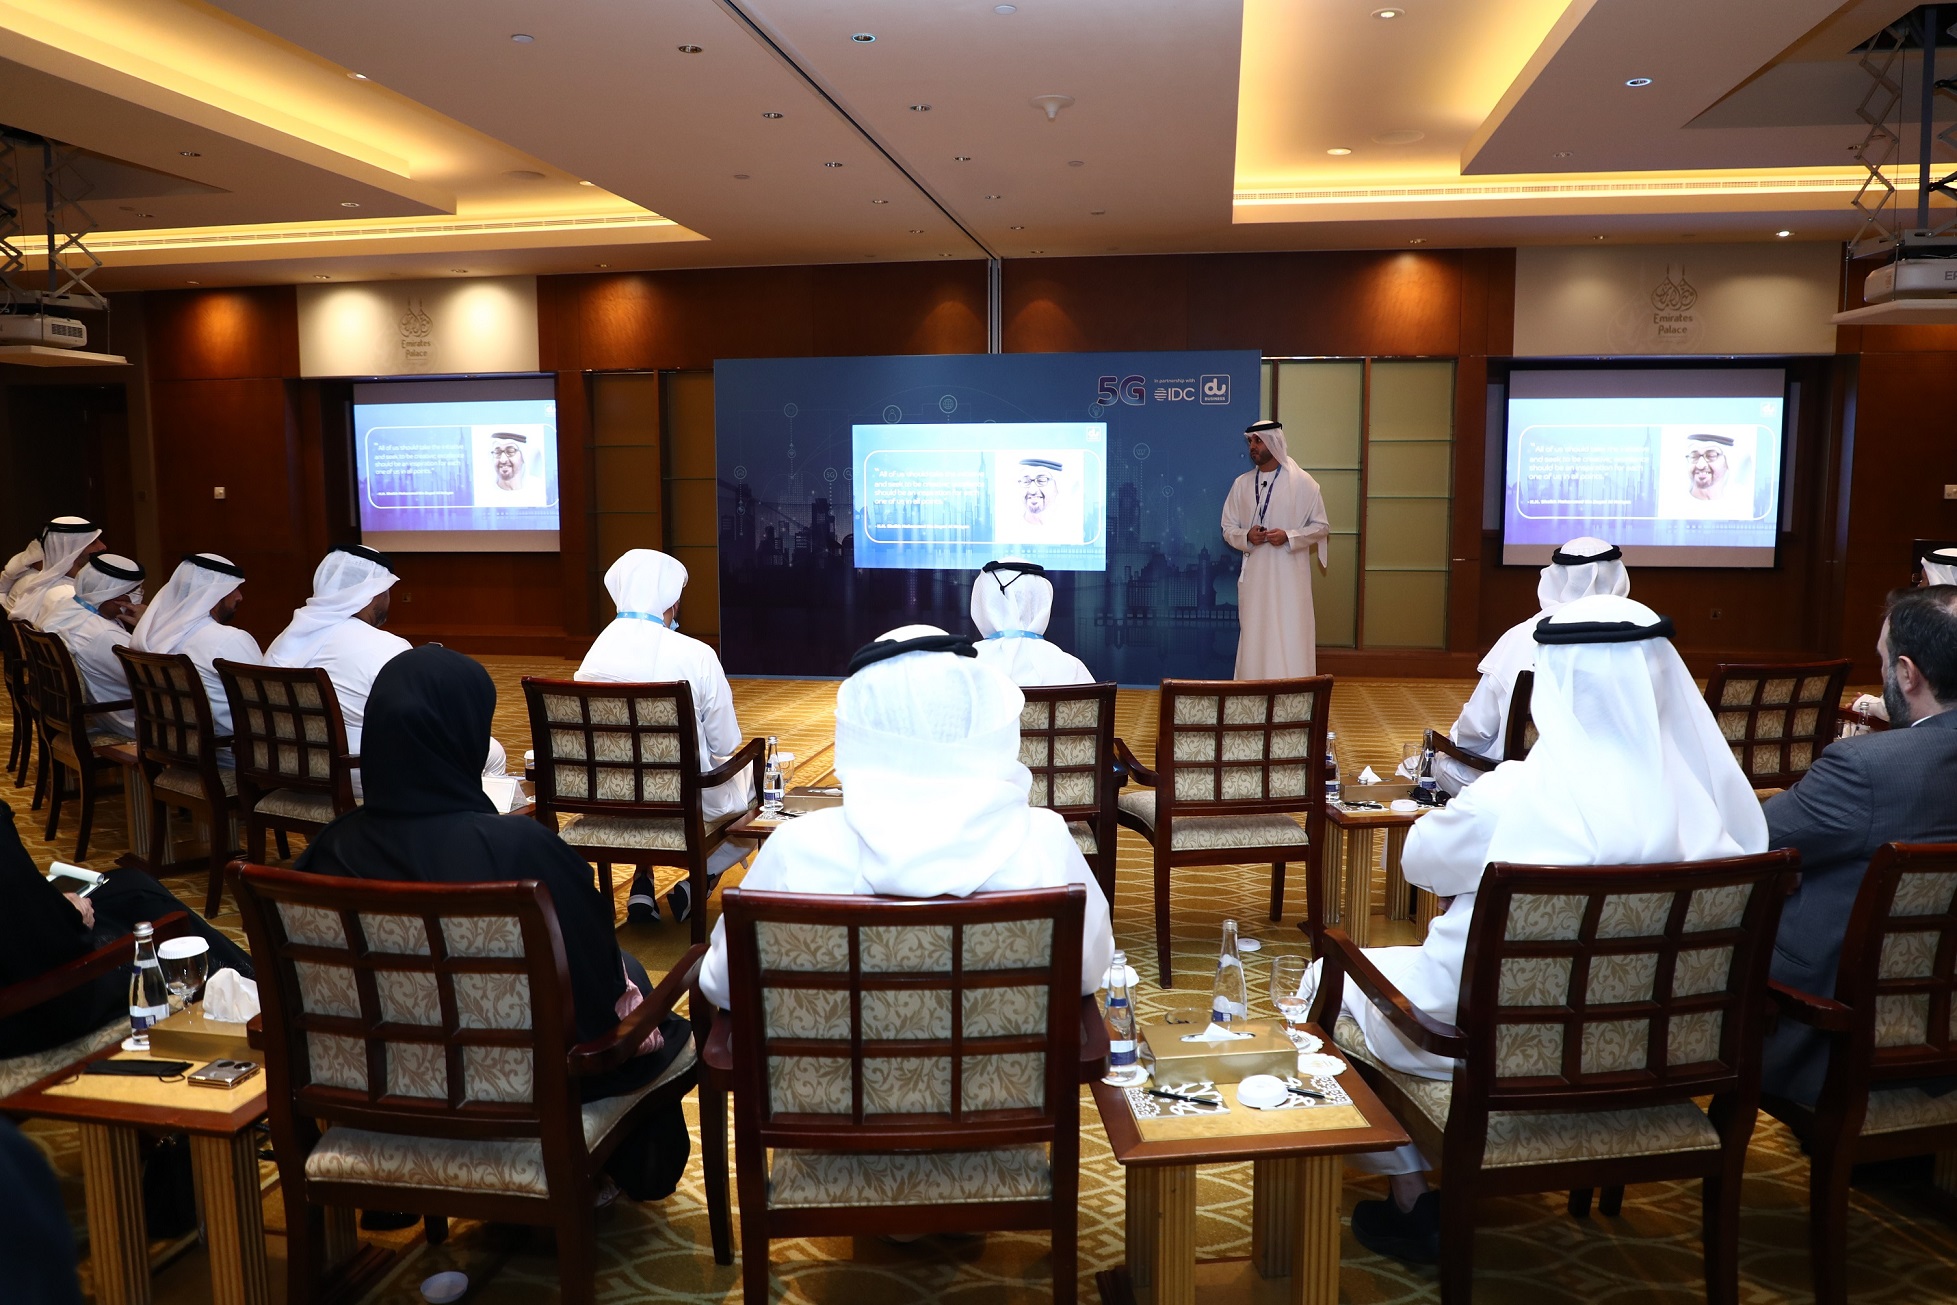 du And IDC Highlight Digital Government Transformation At A Roundtable In Abu Dhabi